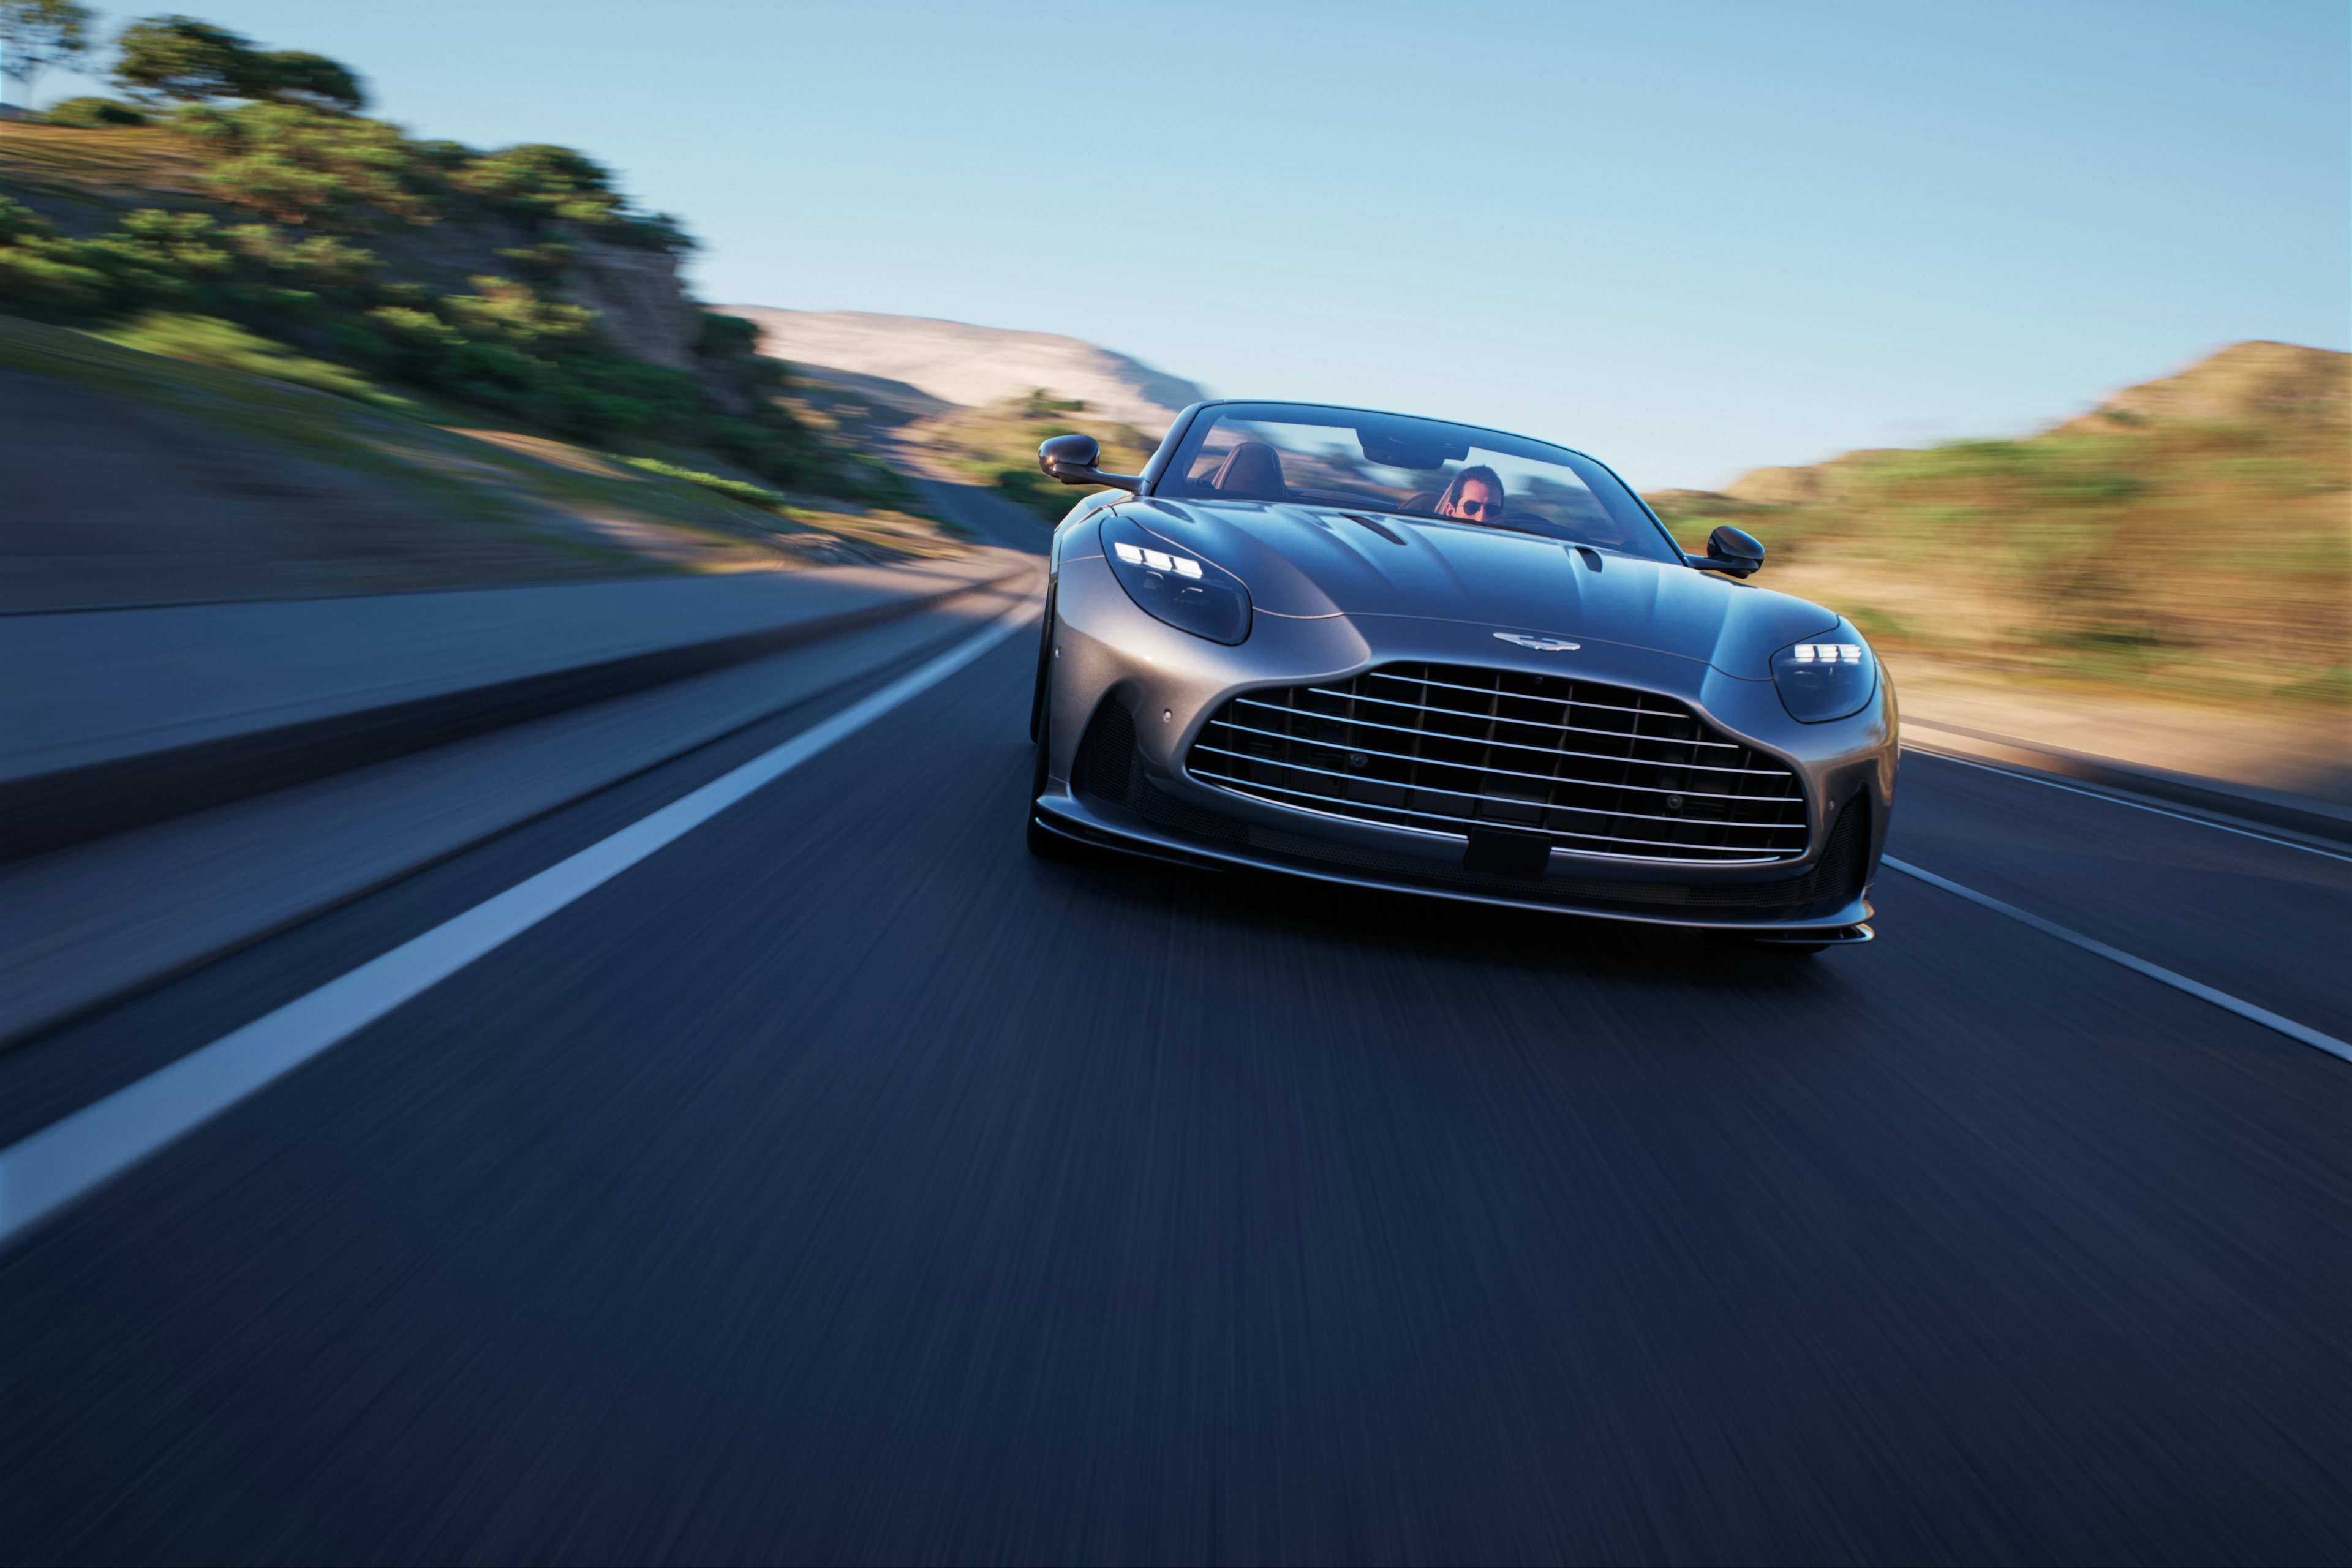 front shot db12 aston marting high speed automotive unreal engine environment